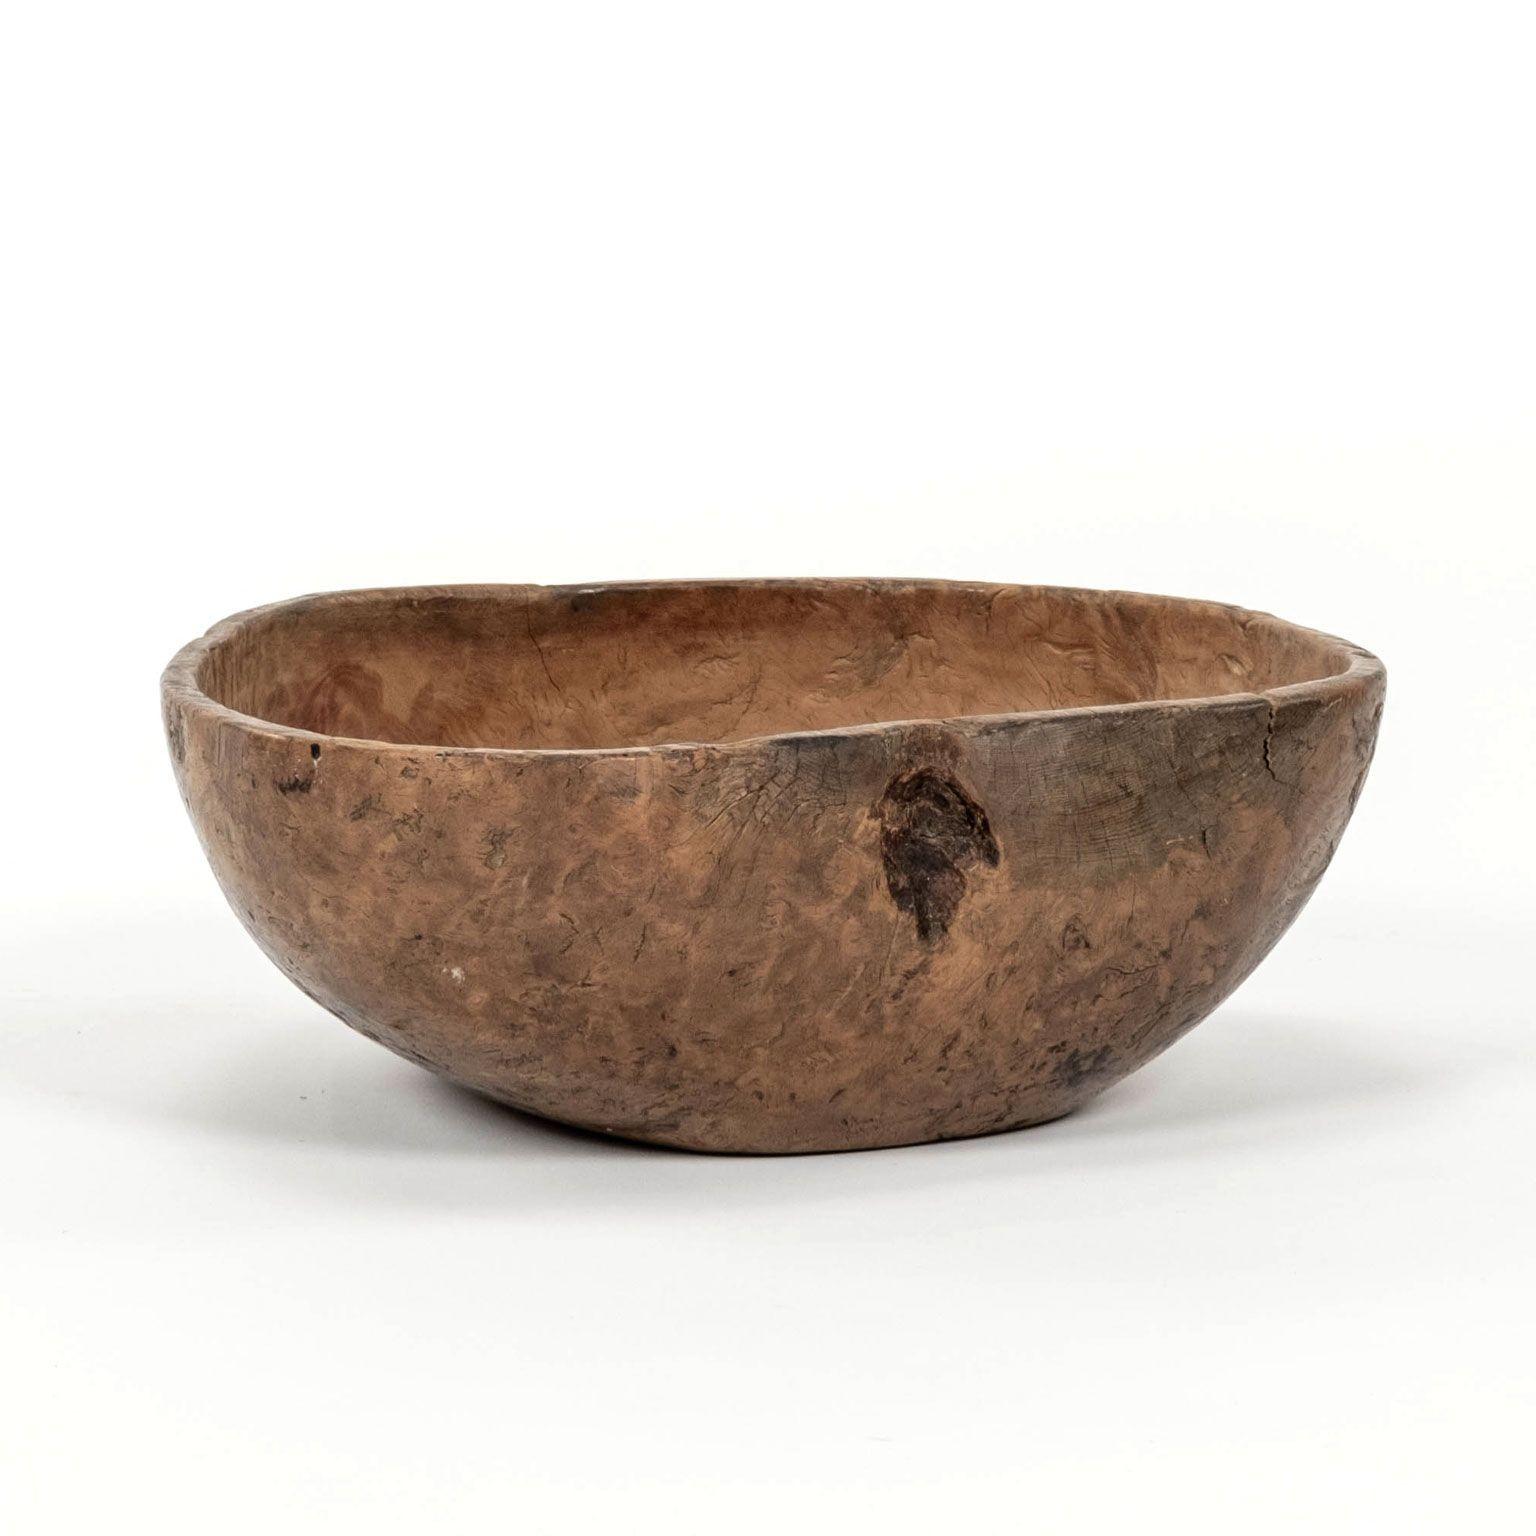 Swedish round yellow ocher-painted primitive dugout root bowl. Dates to mid-19th century. Beautiful burled grain. Inscribed underneath 